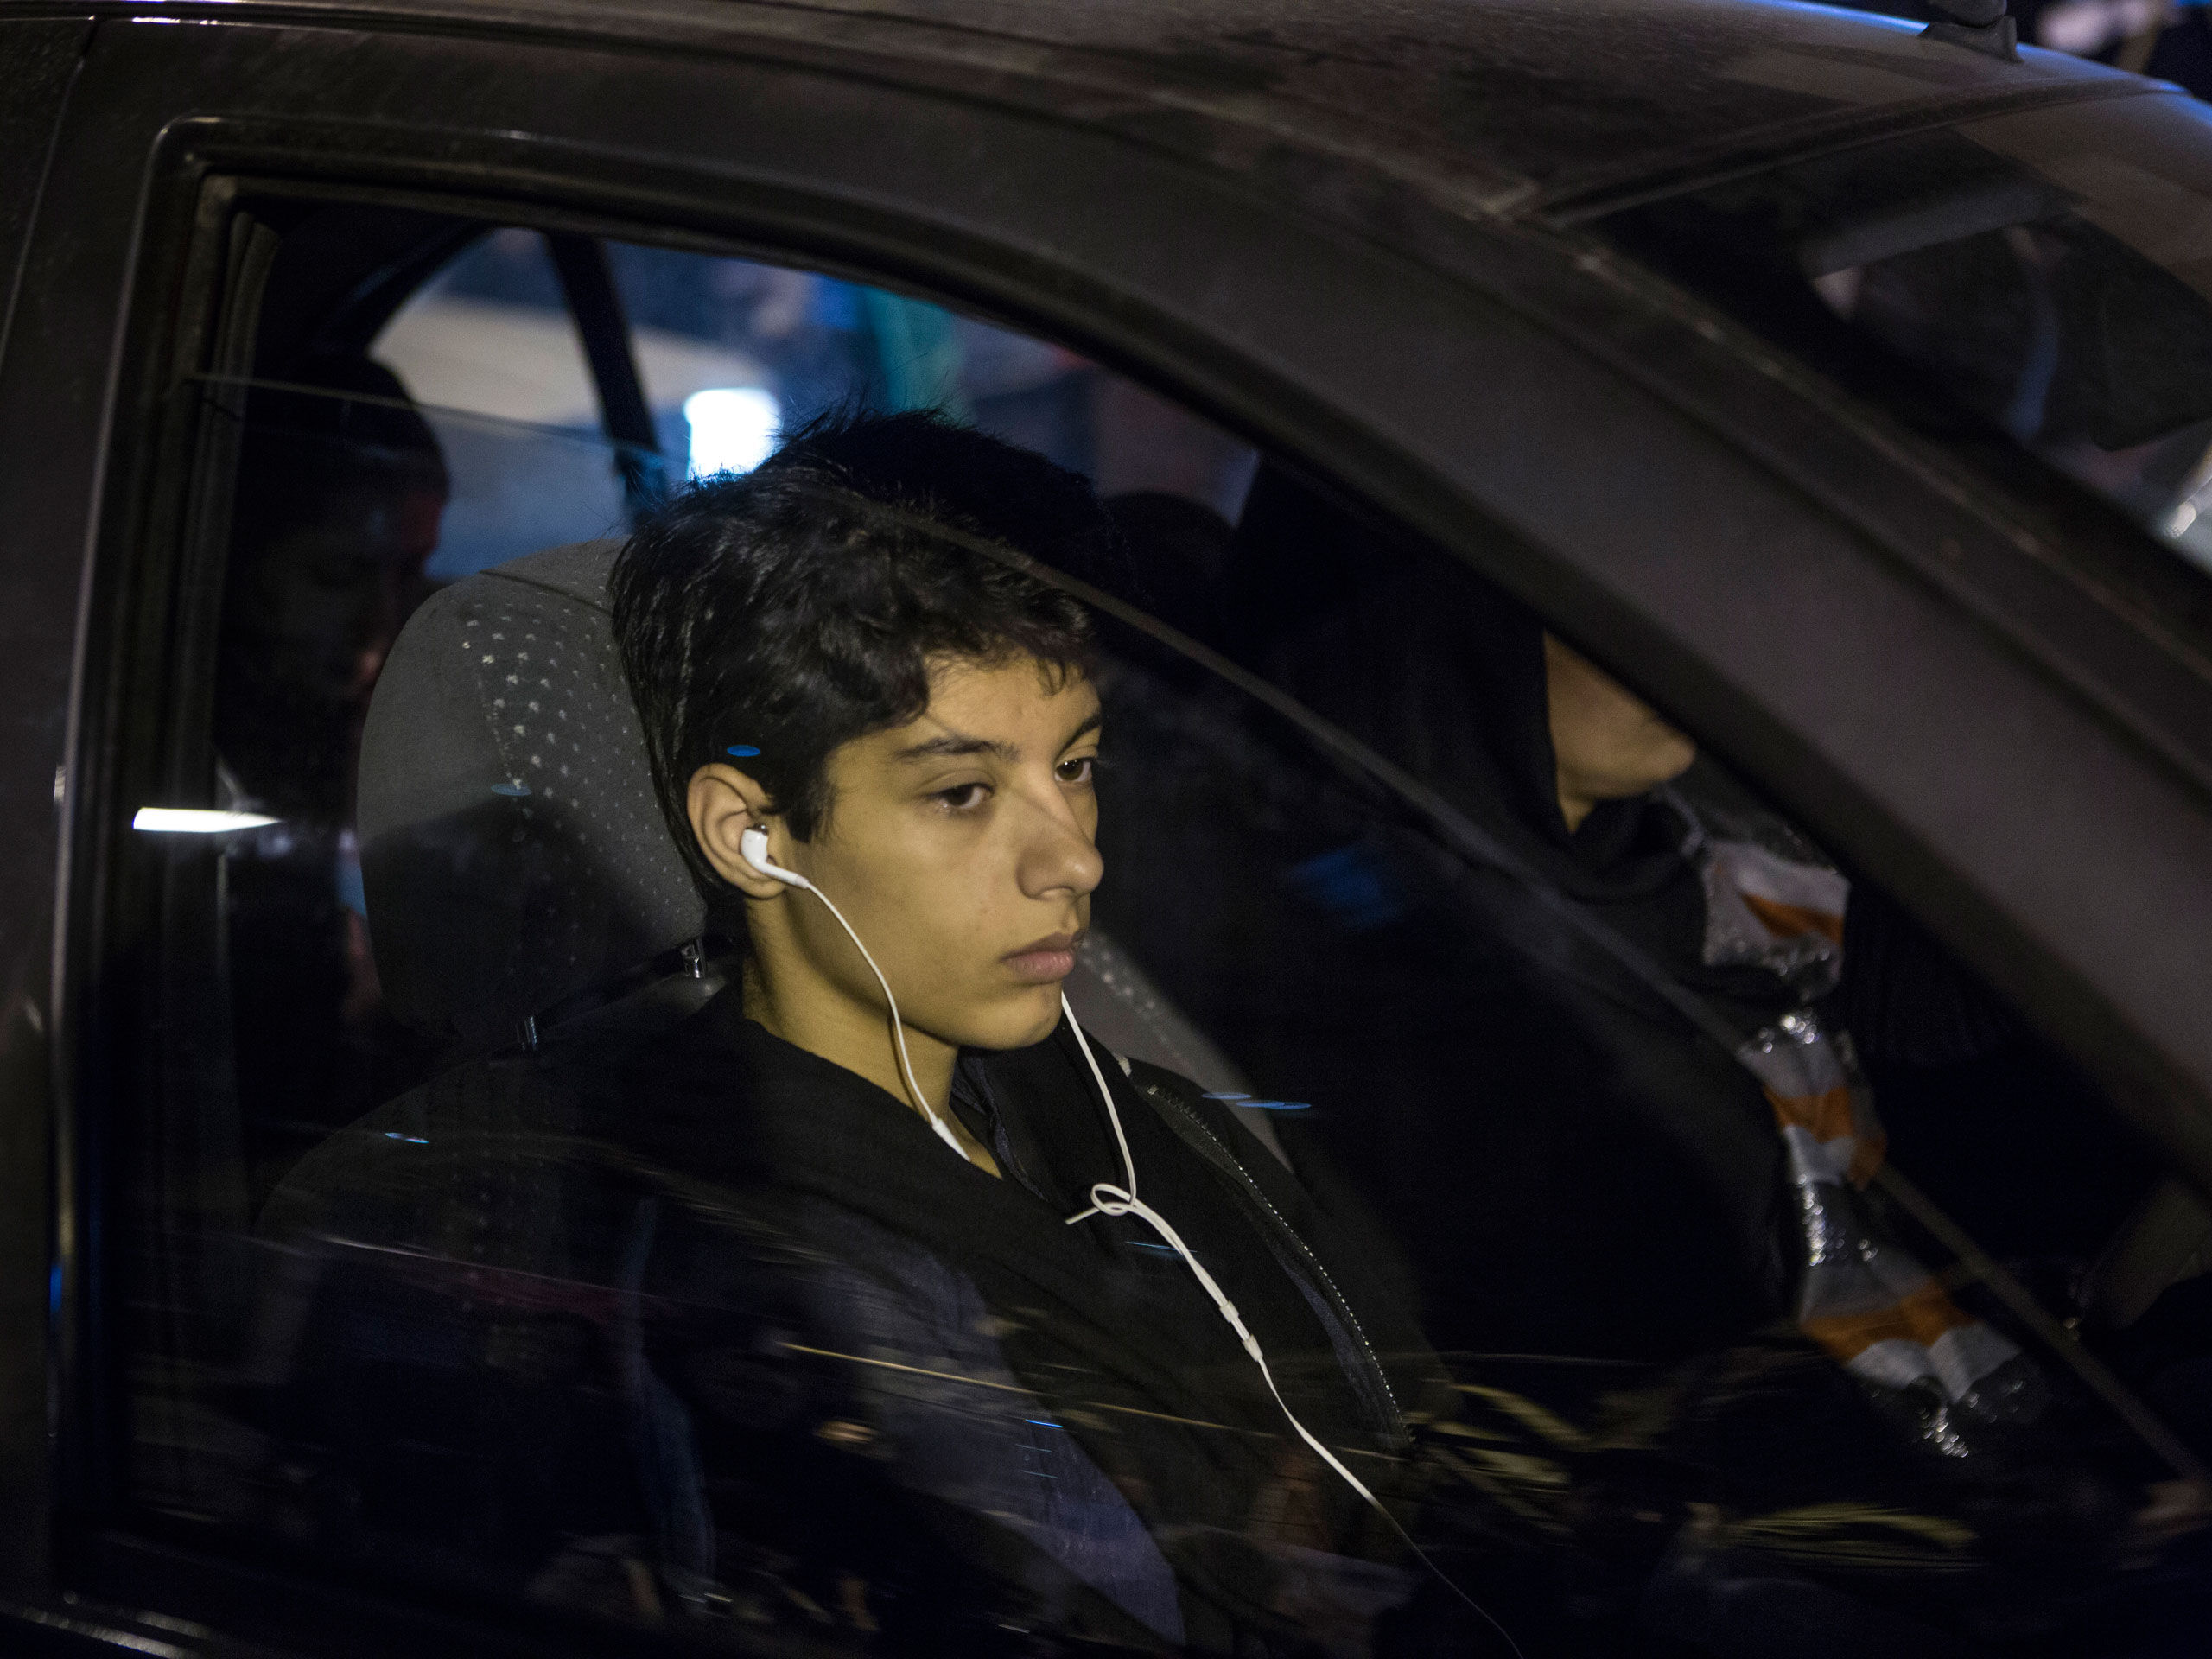 A young man sits in a car next to his mother in Tehran, where the use of headsets and mobile phones is widespread.